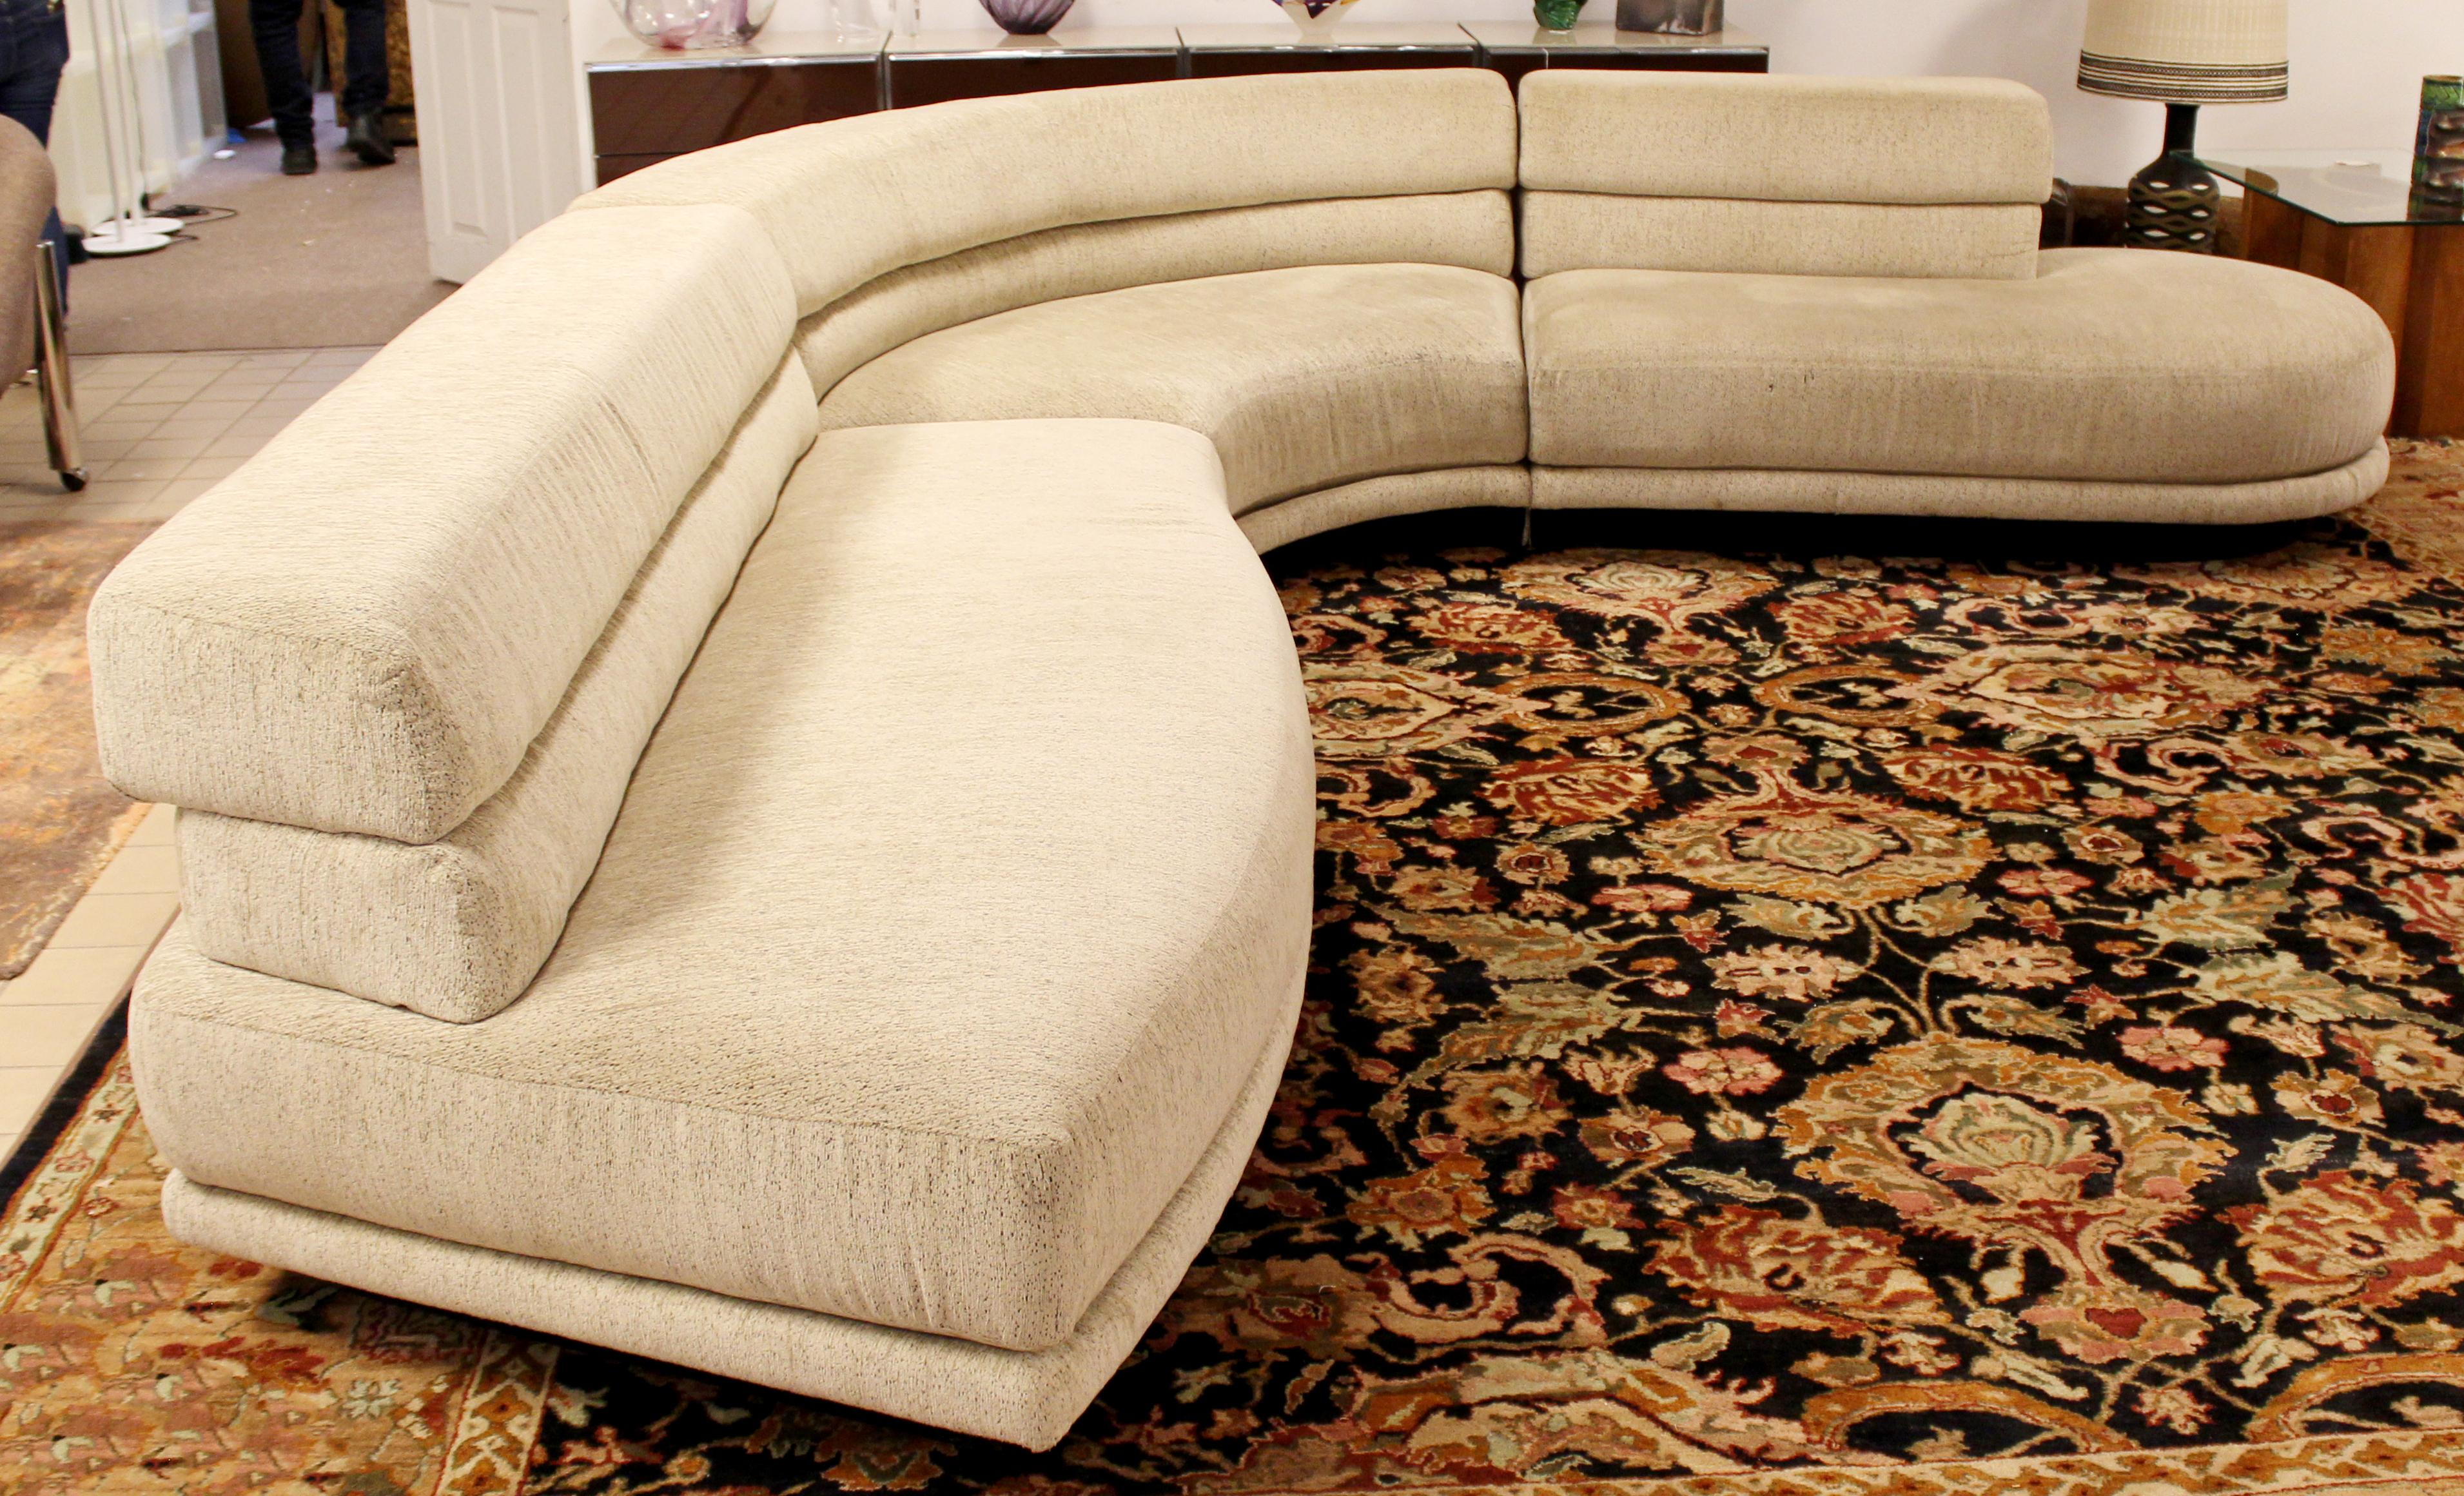 American Contemporary Modernist Sculptural Serpentine Sofa Sectional Kagan Style, 1980s